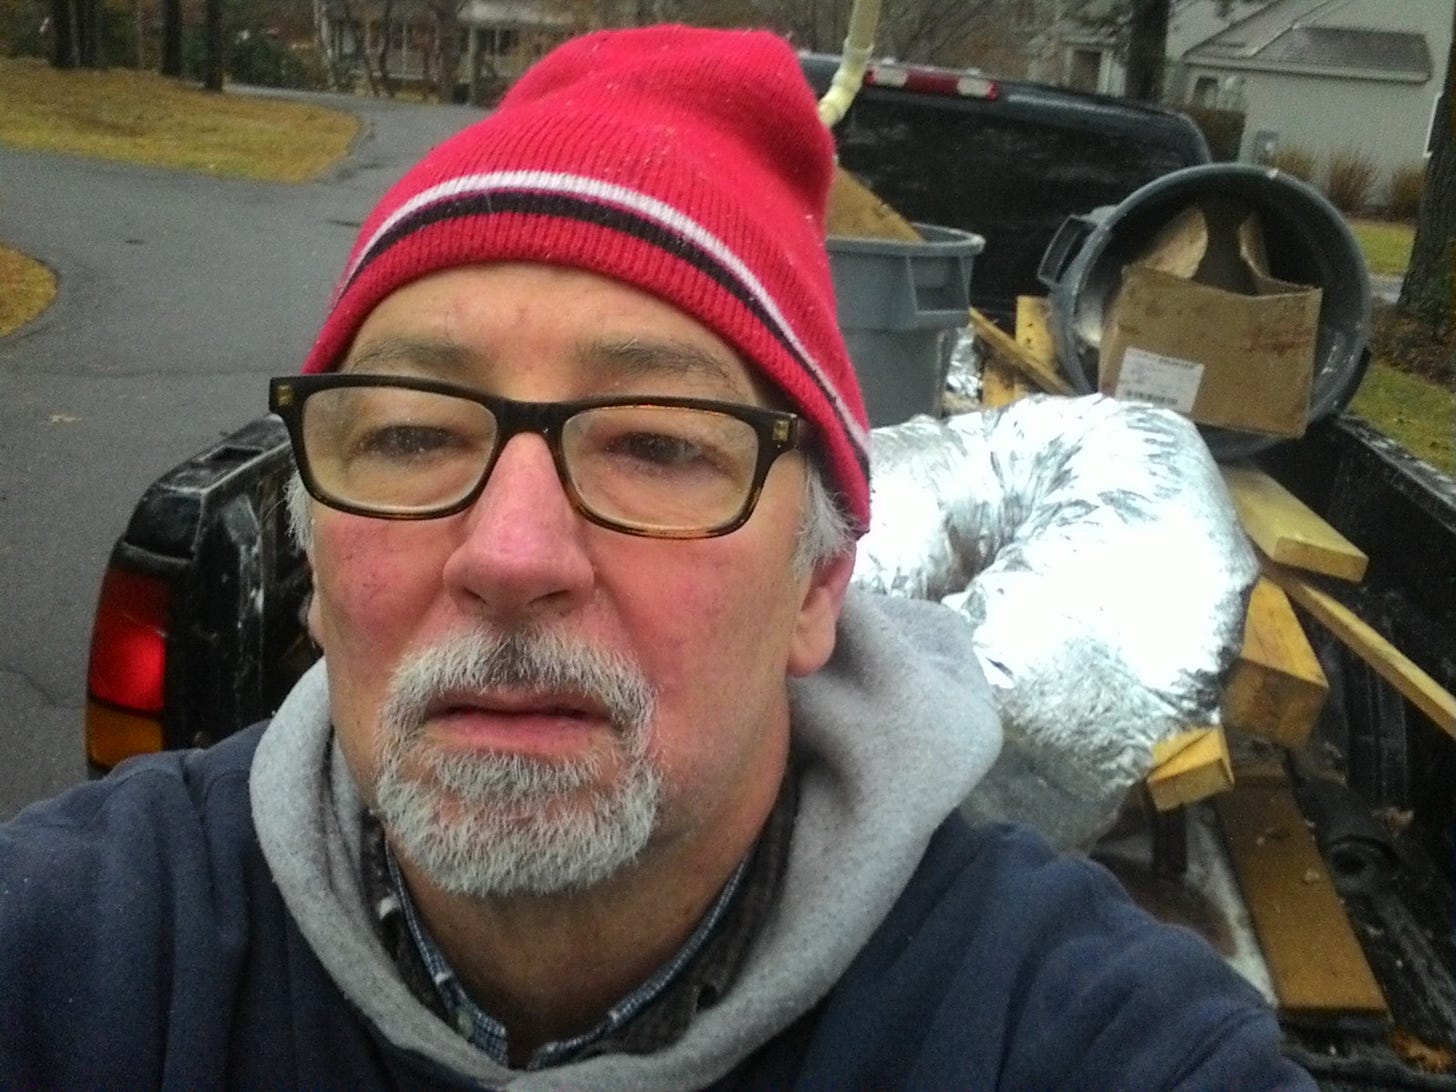 Selfie of me, my face red from the cold, wearing workman's clothes, in front of a pickup truck full of demolition debris from a construction site. 